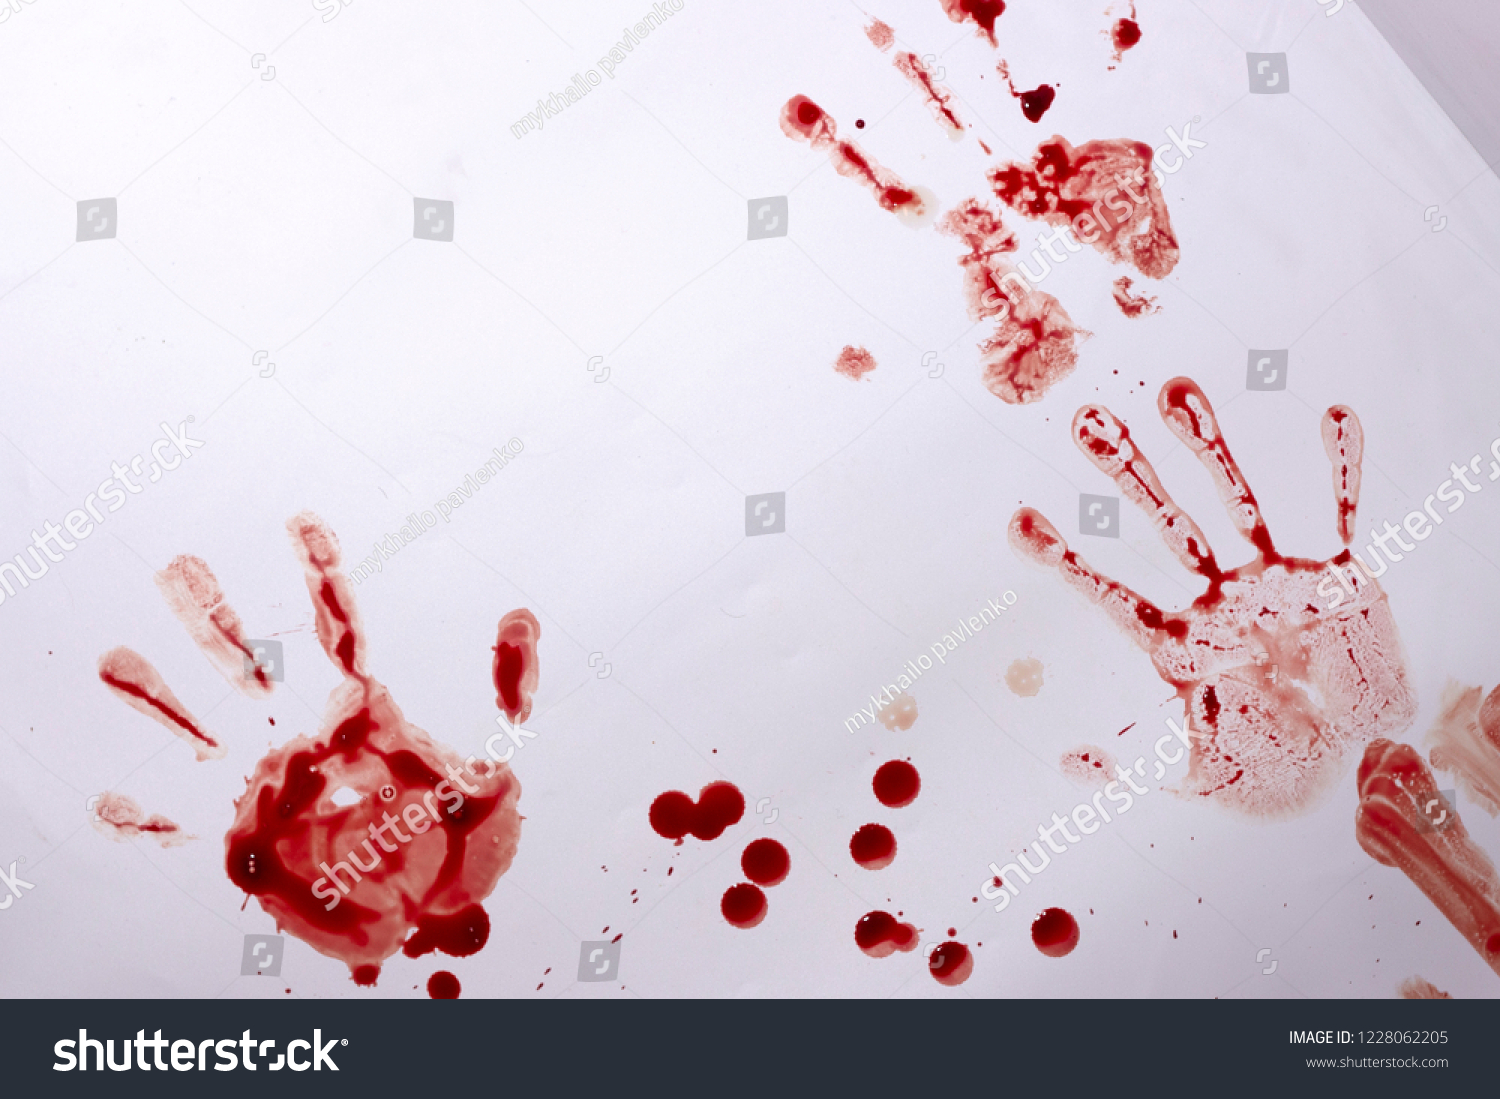 Red imprint of the bloody palm on a white background #1228062205